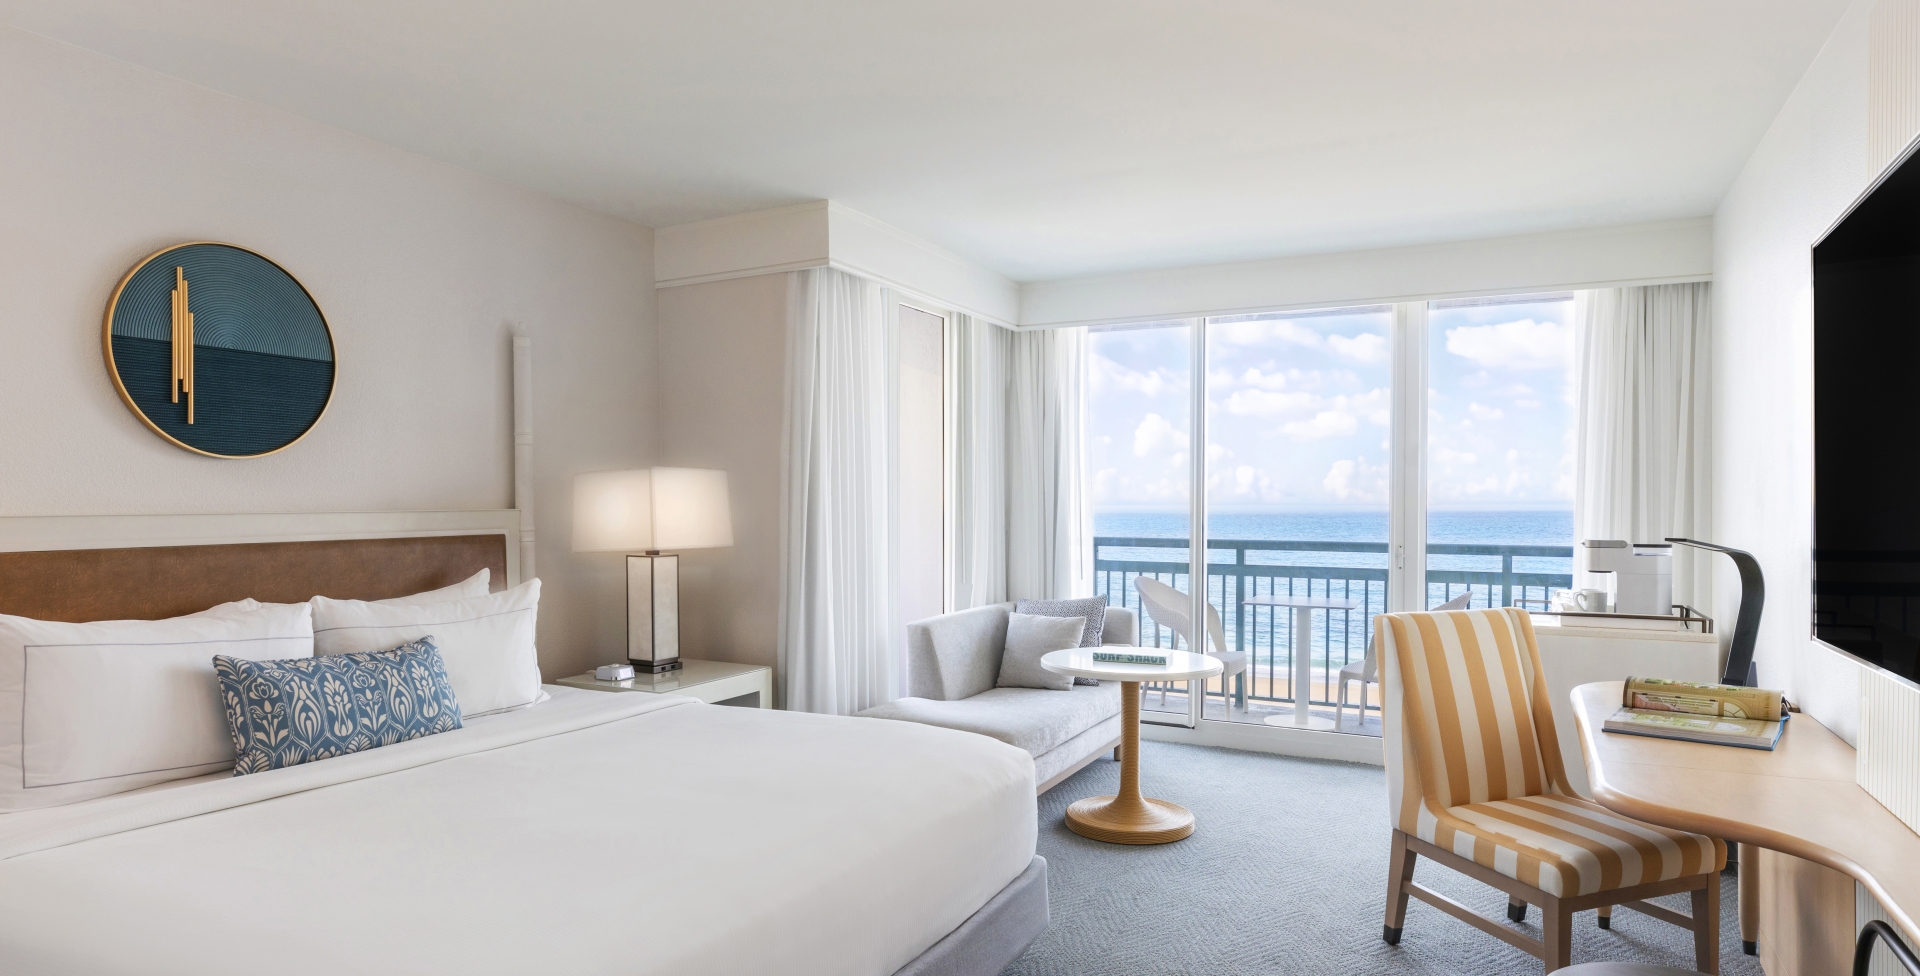 Spacious guest room with stunning views and elegant decor at The Singer Oceanfront Resort